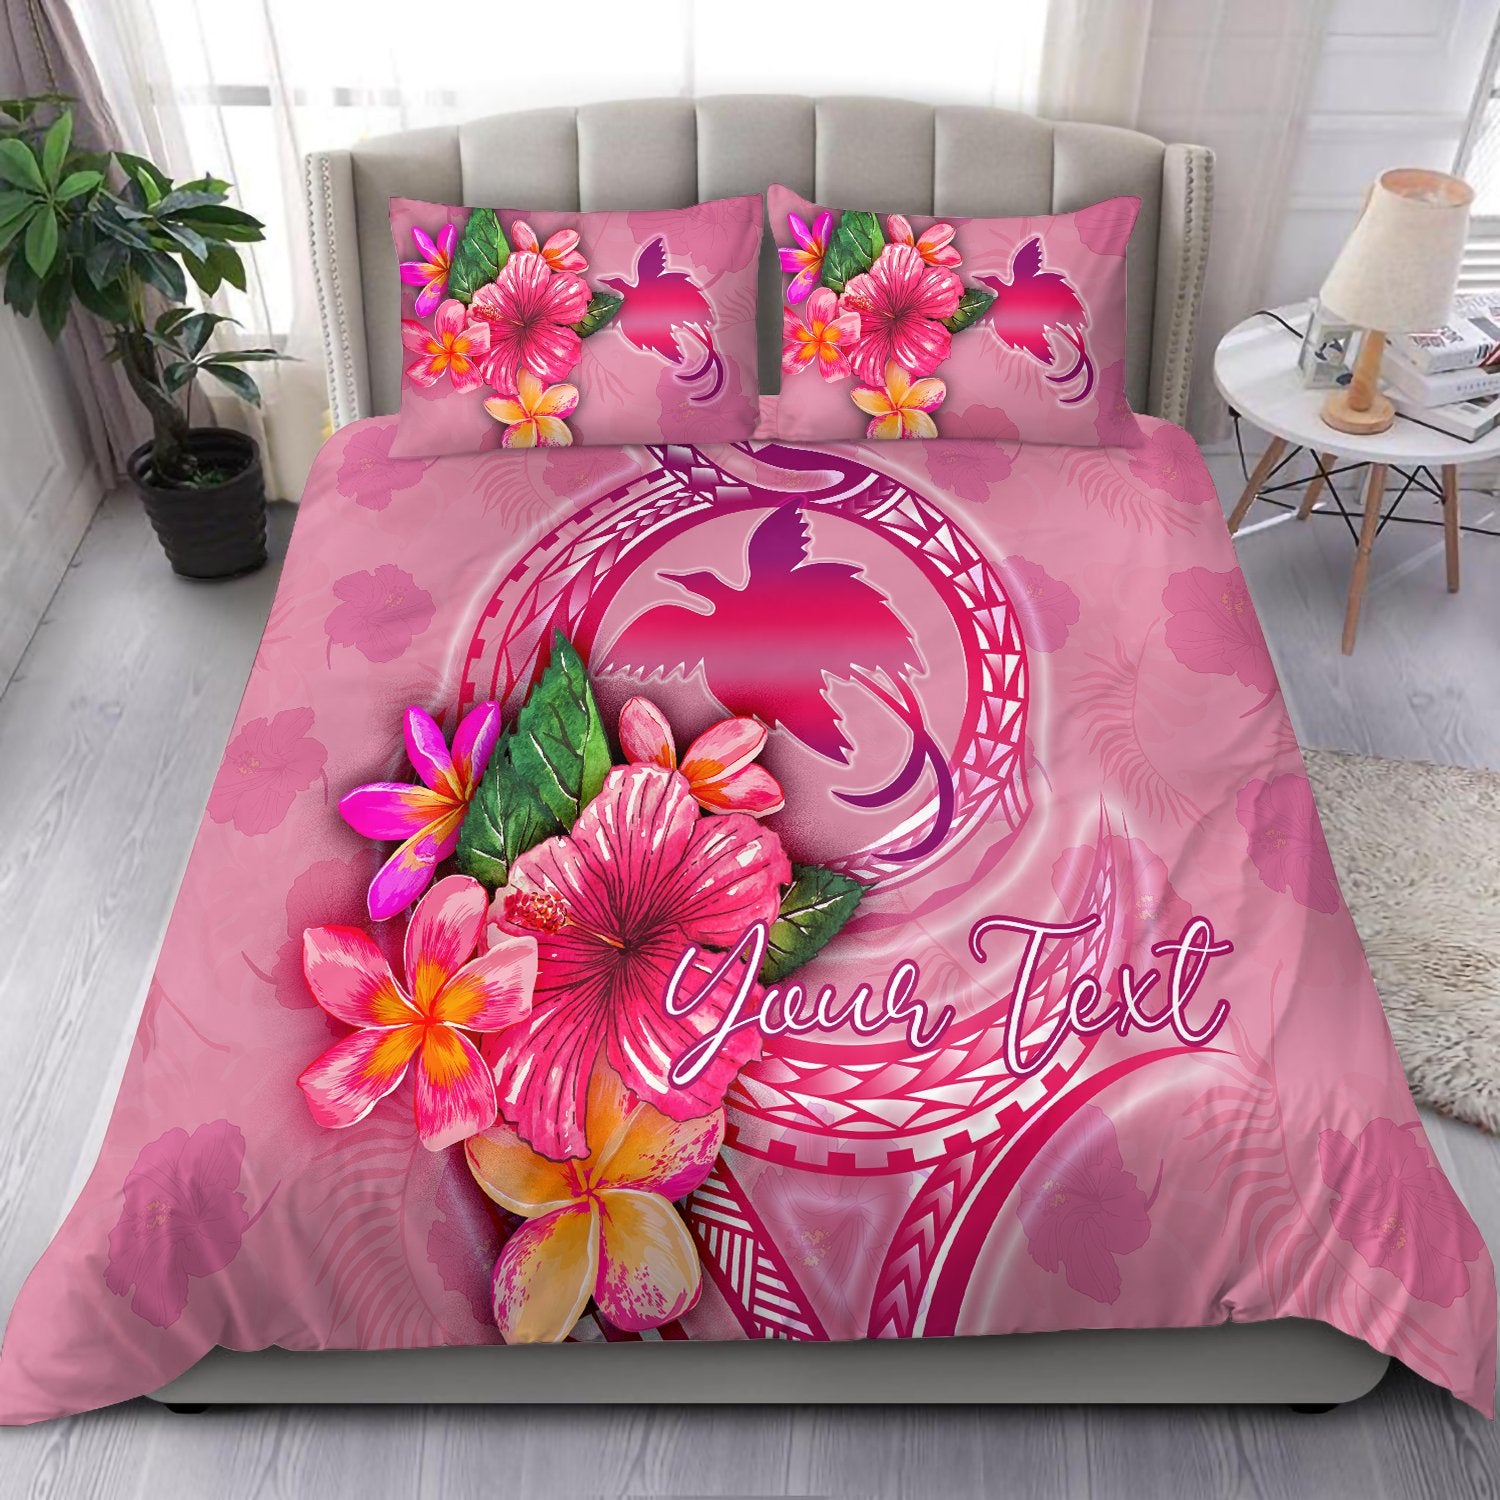 Papua New Guinea Polynesian Custom Personalised Bedding Set - Floral With Seal Pink pink - Polynesian Pride